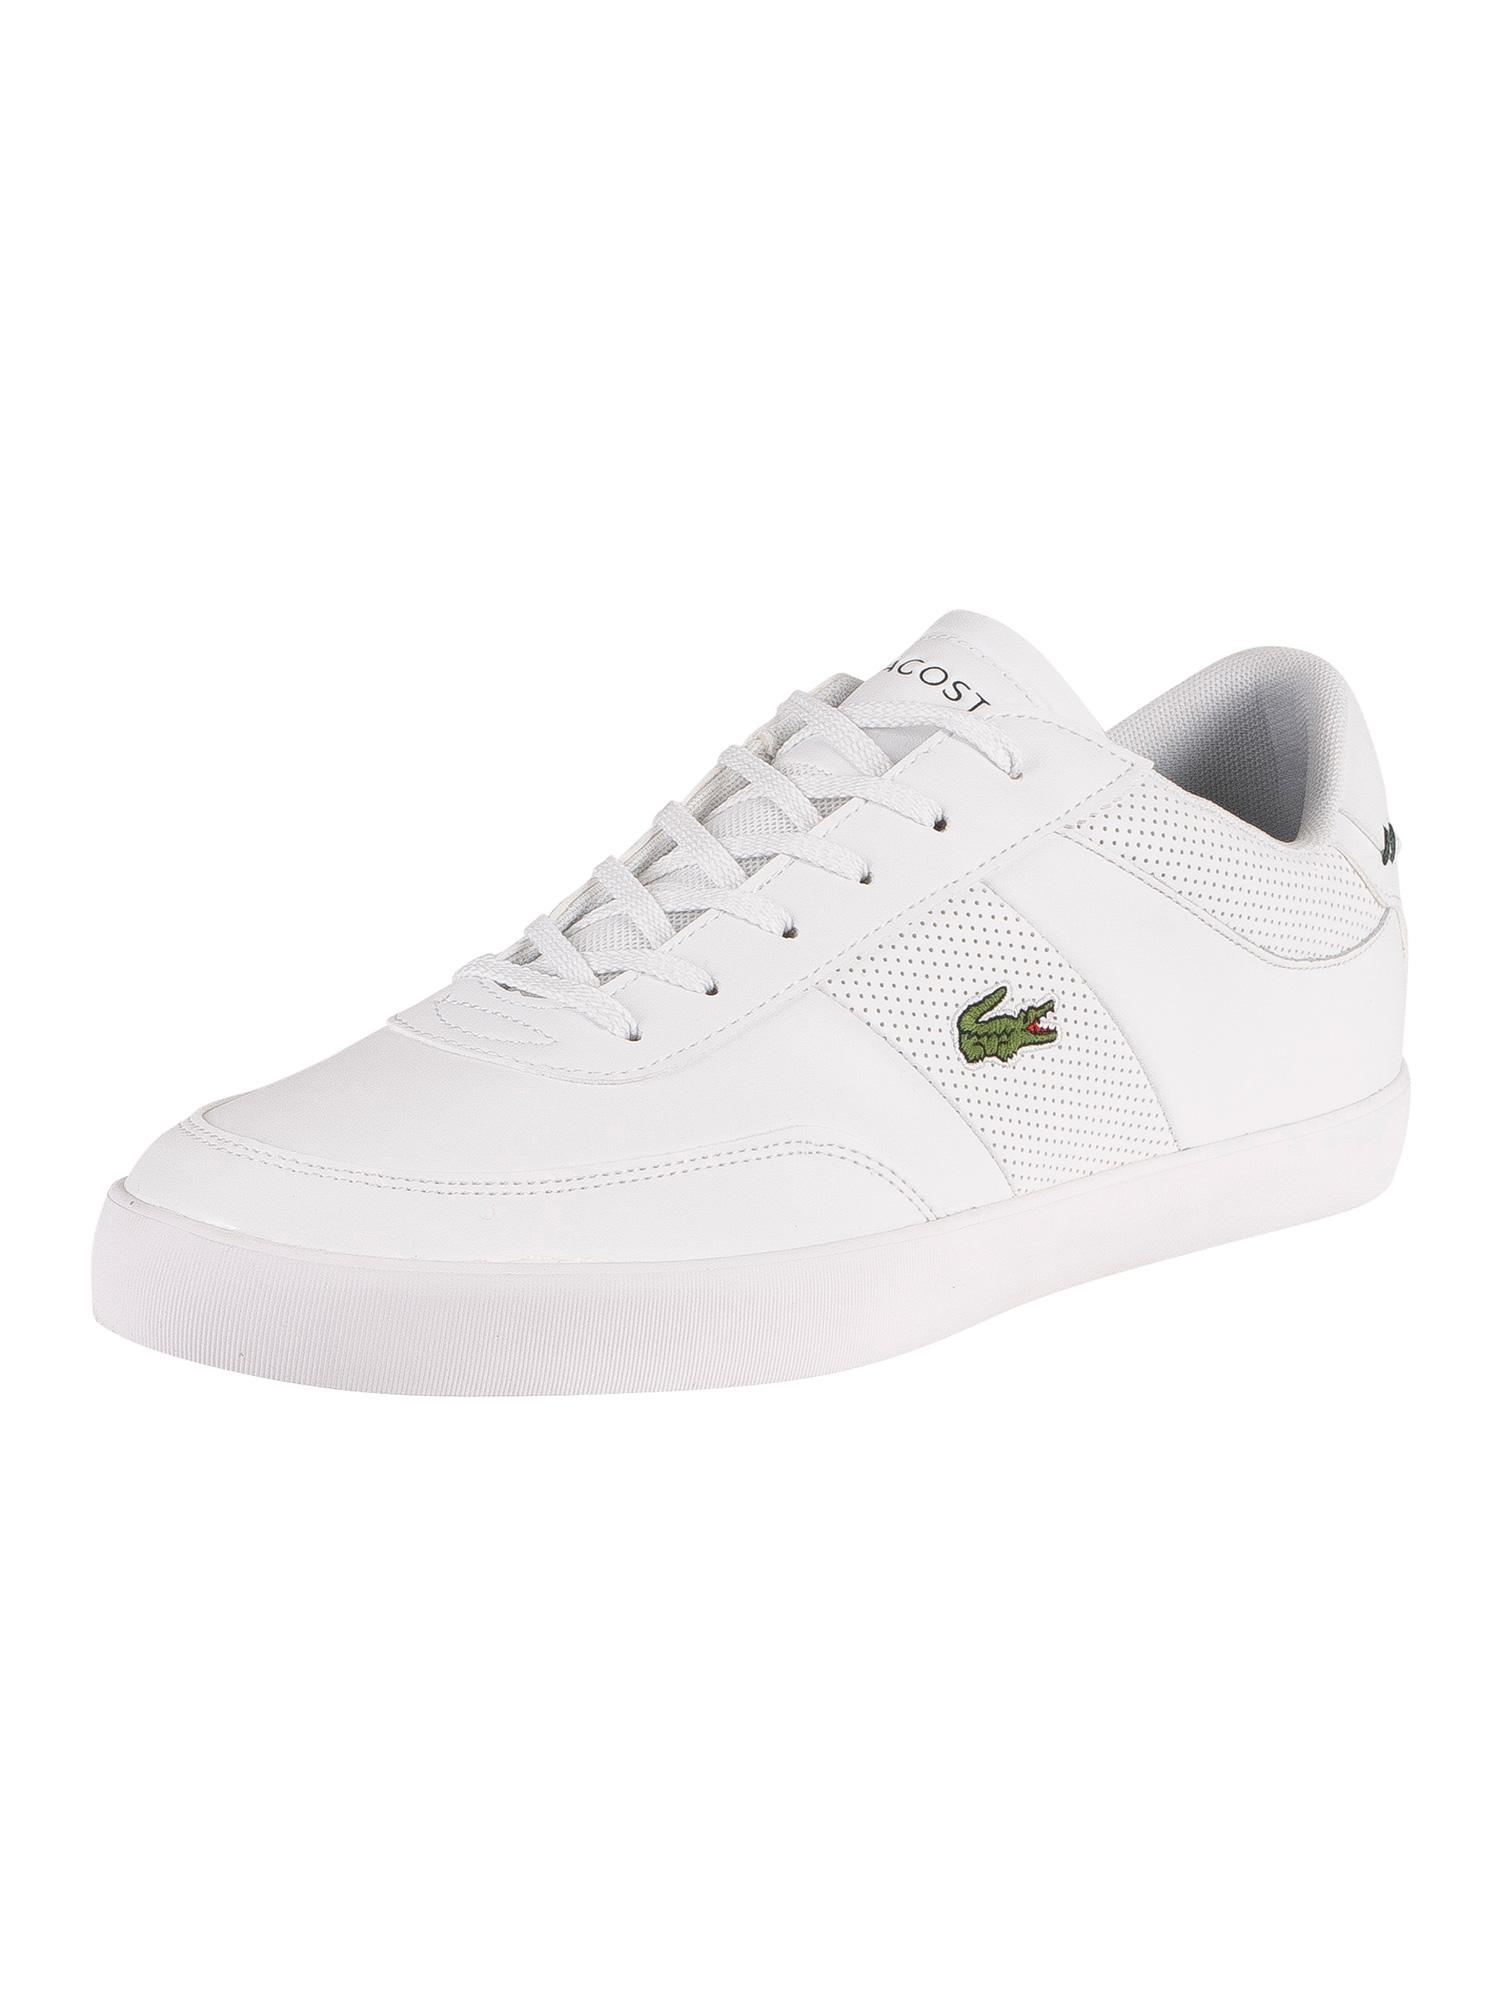 Lacoste Court Master 0120 1 Cma Leather Trainers in White/White (White ...